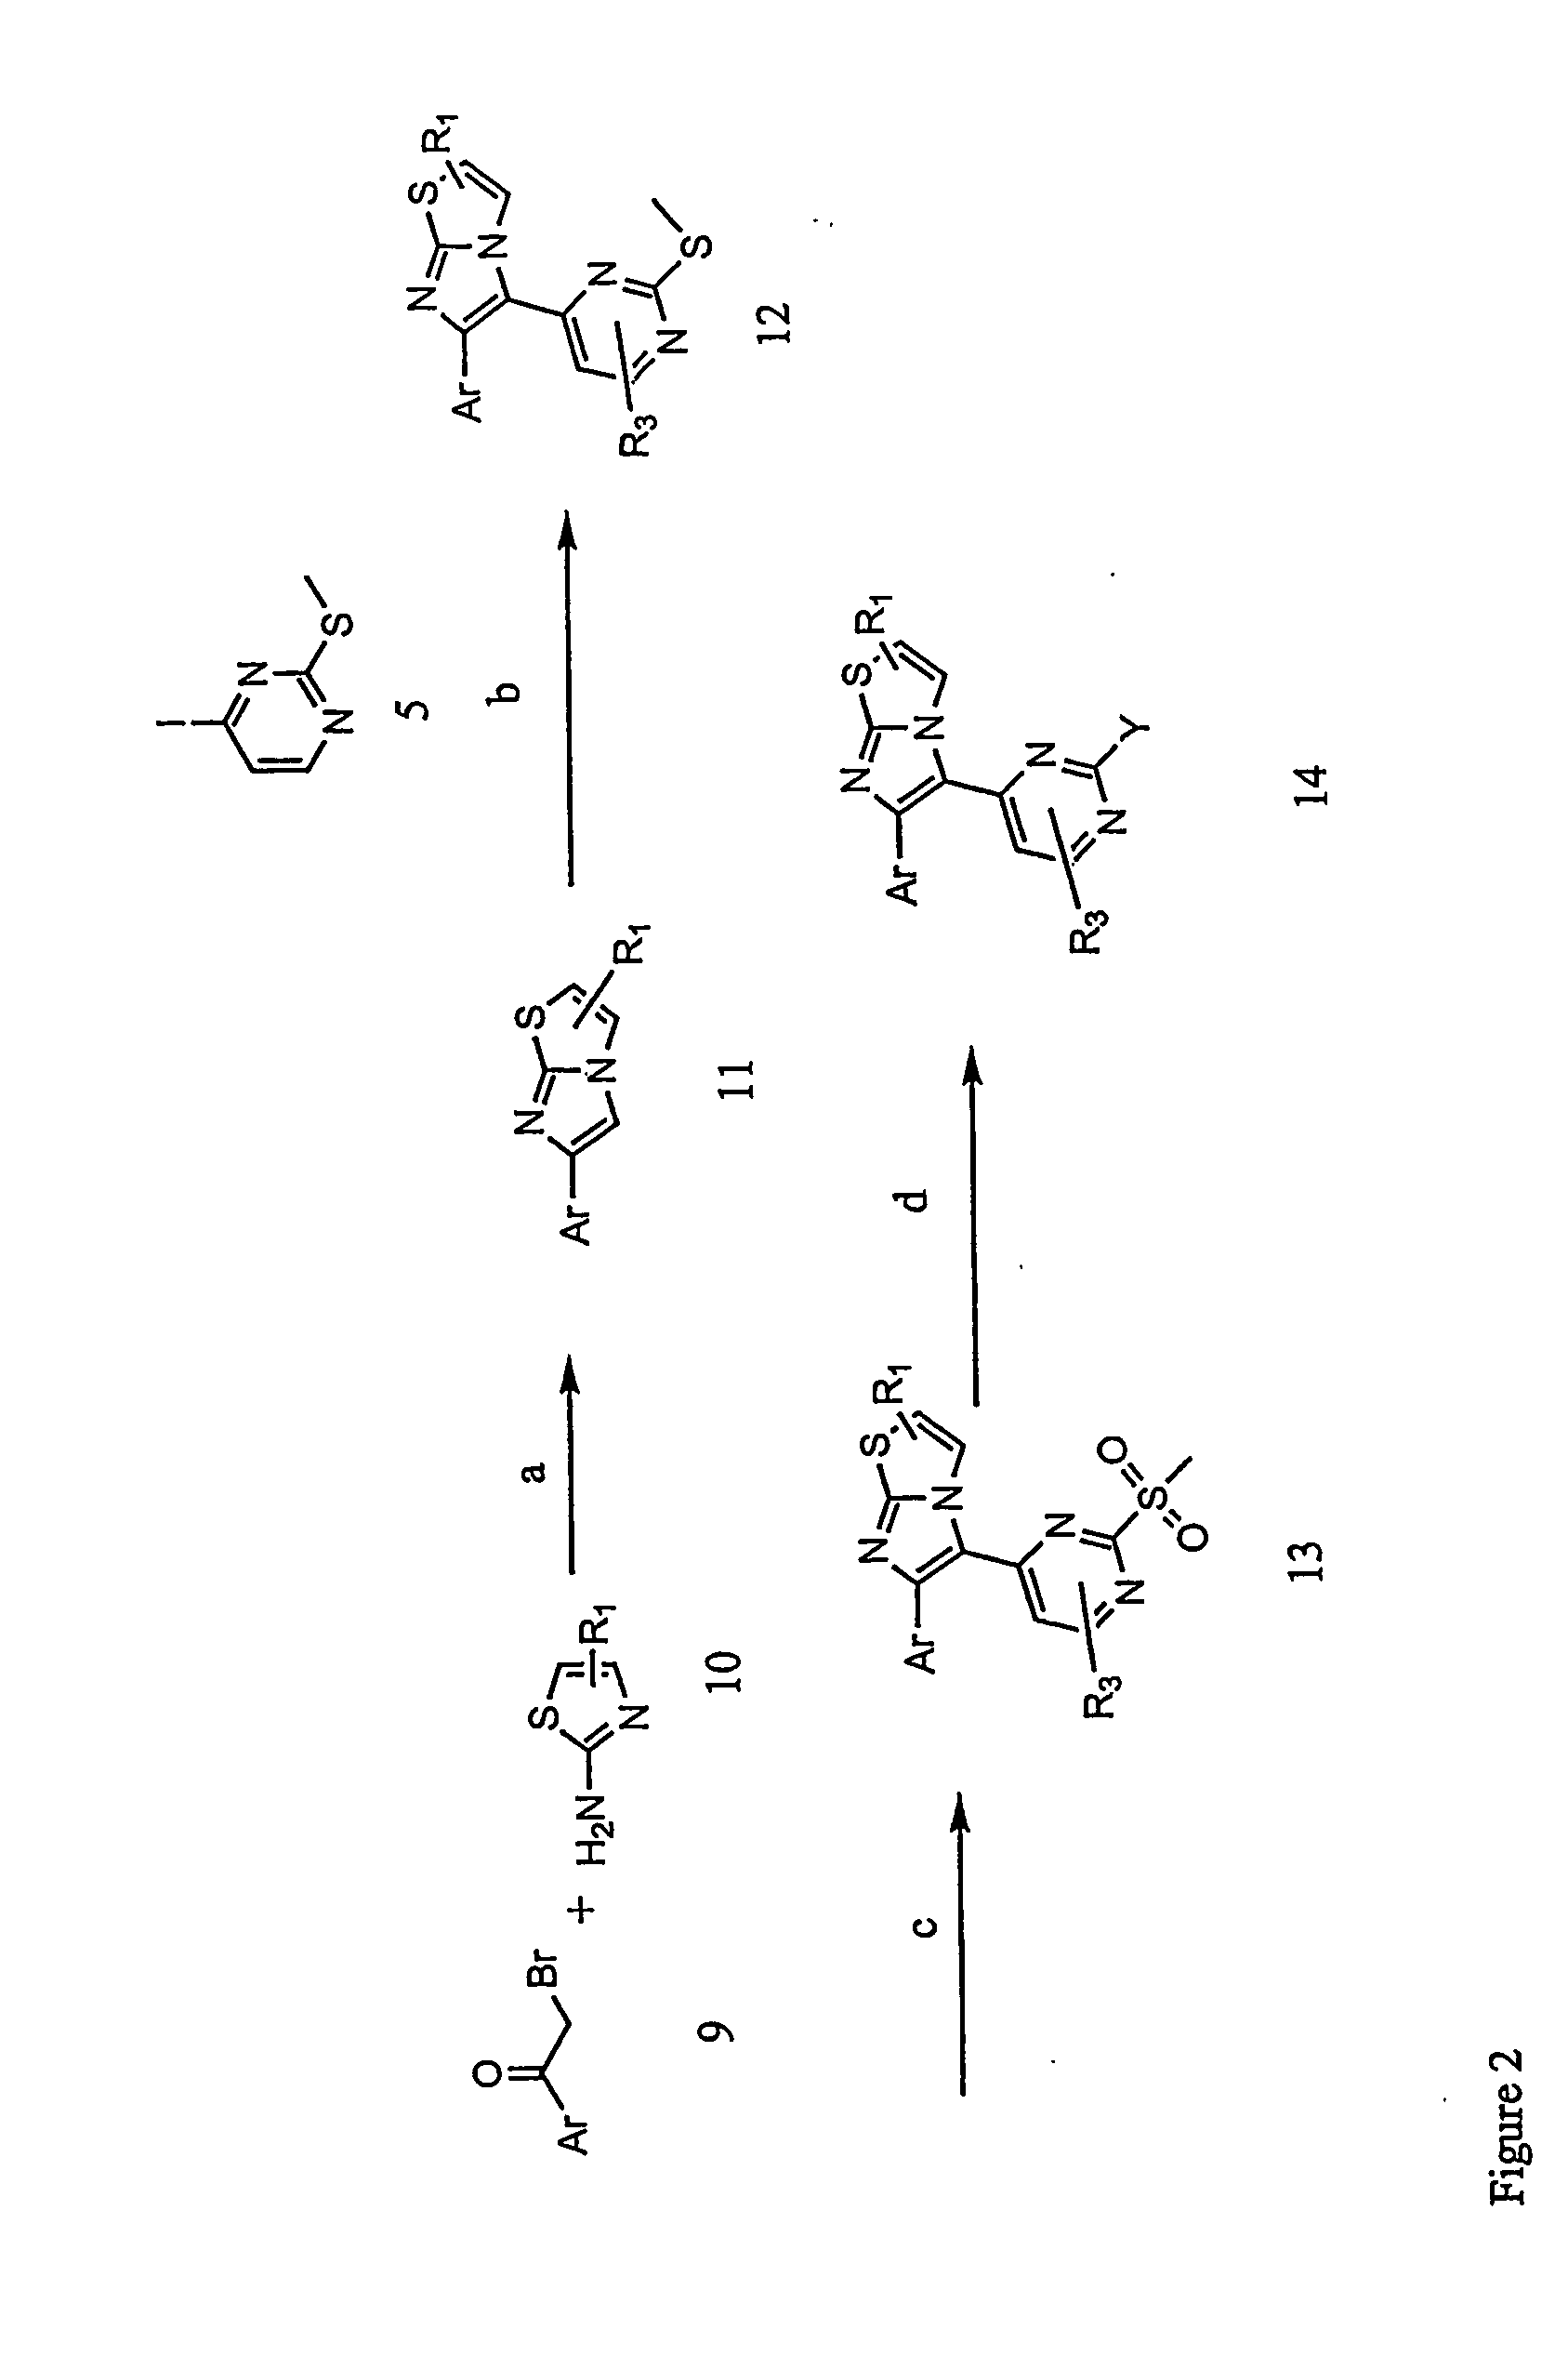 Inhibitors of P38 and Methods of Using the Same